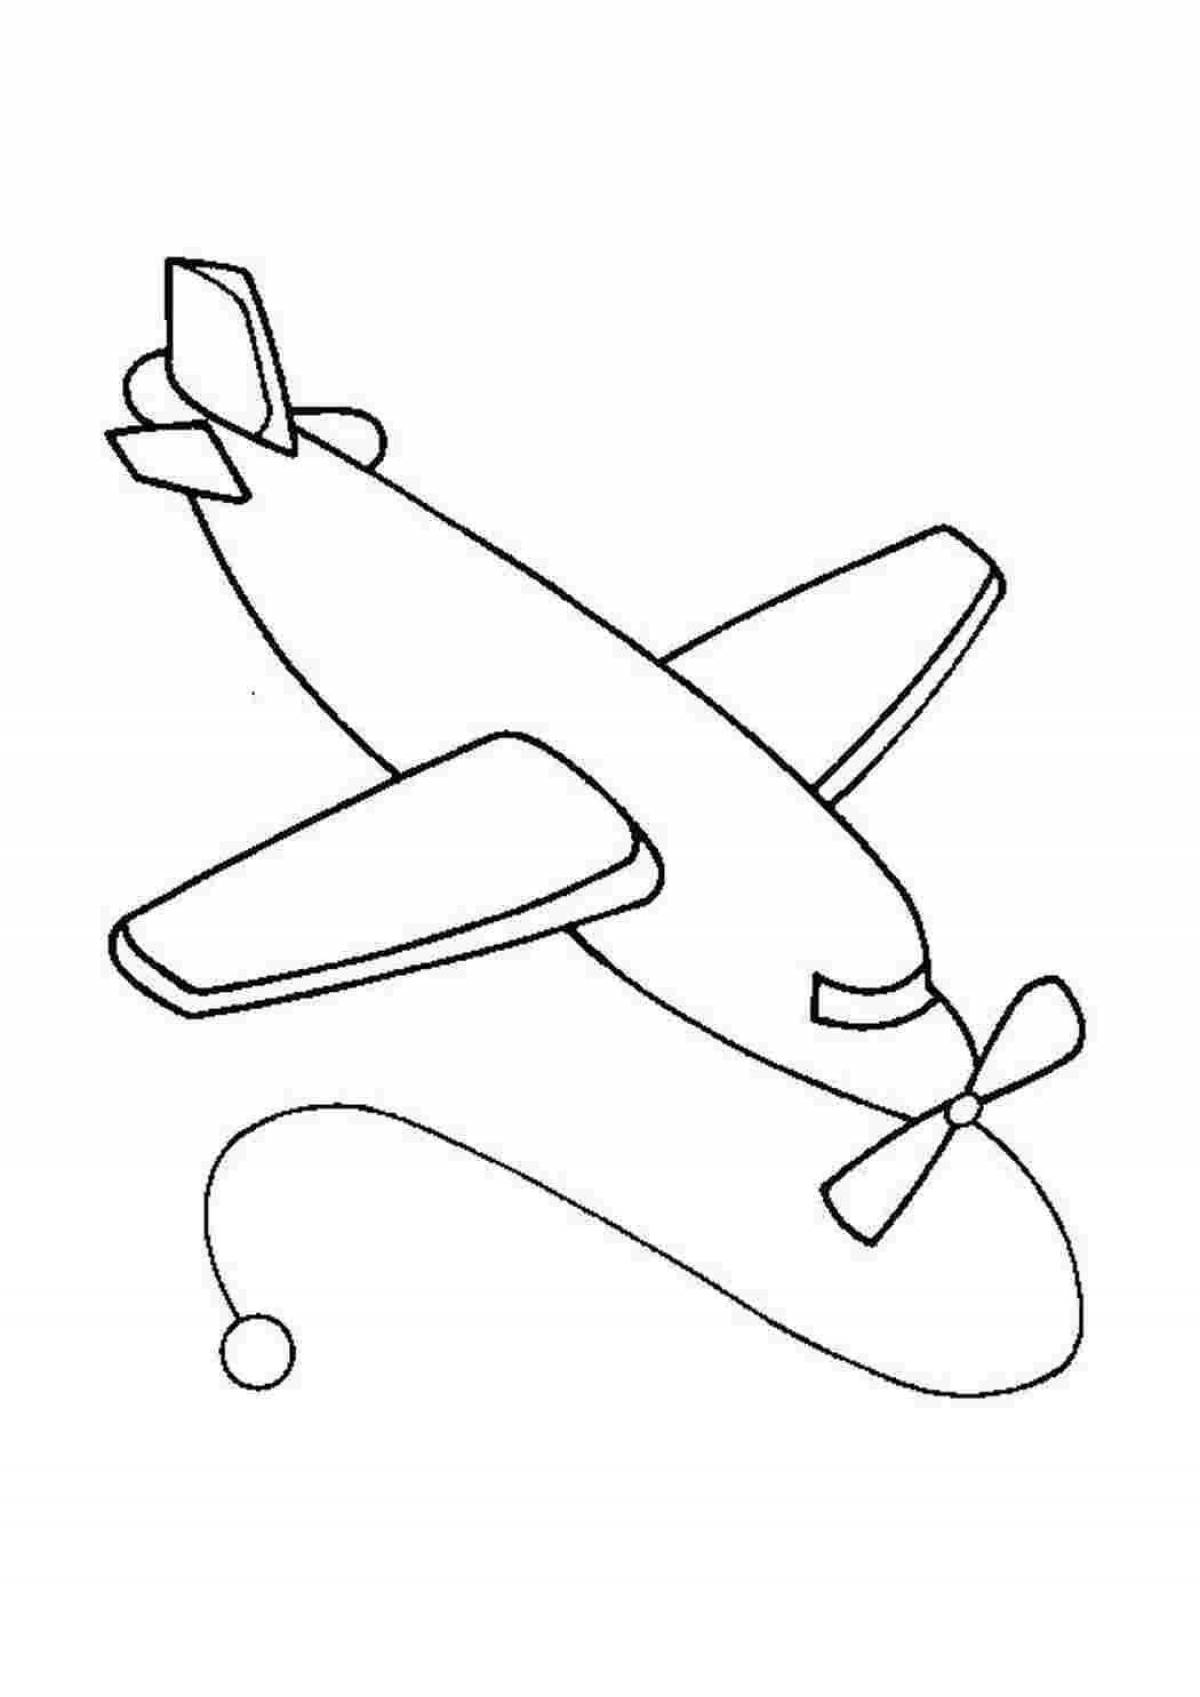 Adorable airplane drawing for kids